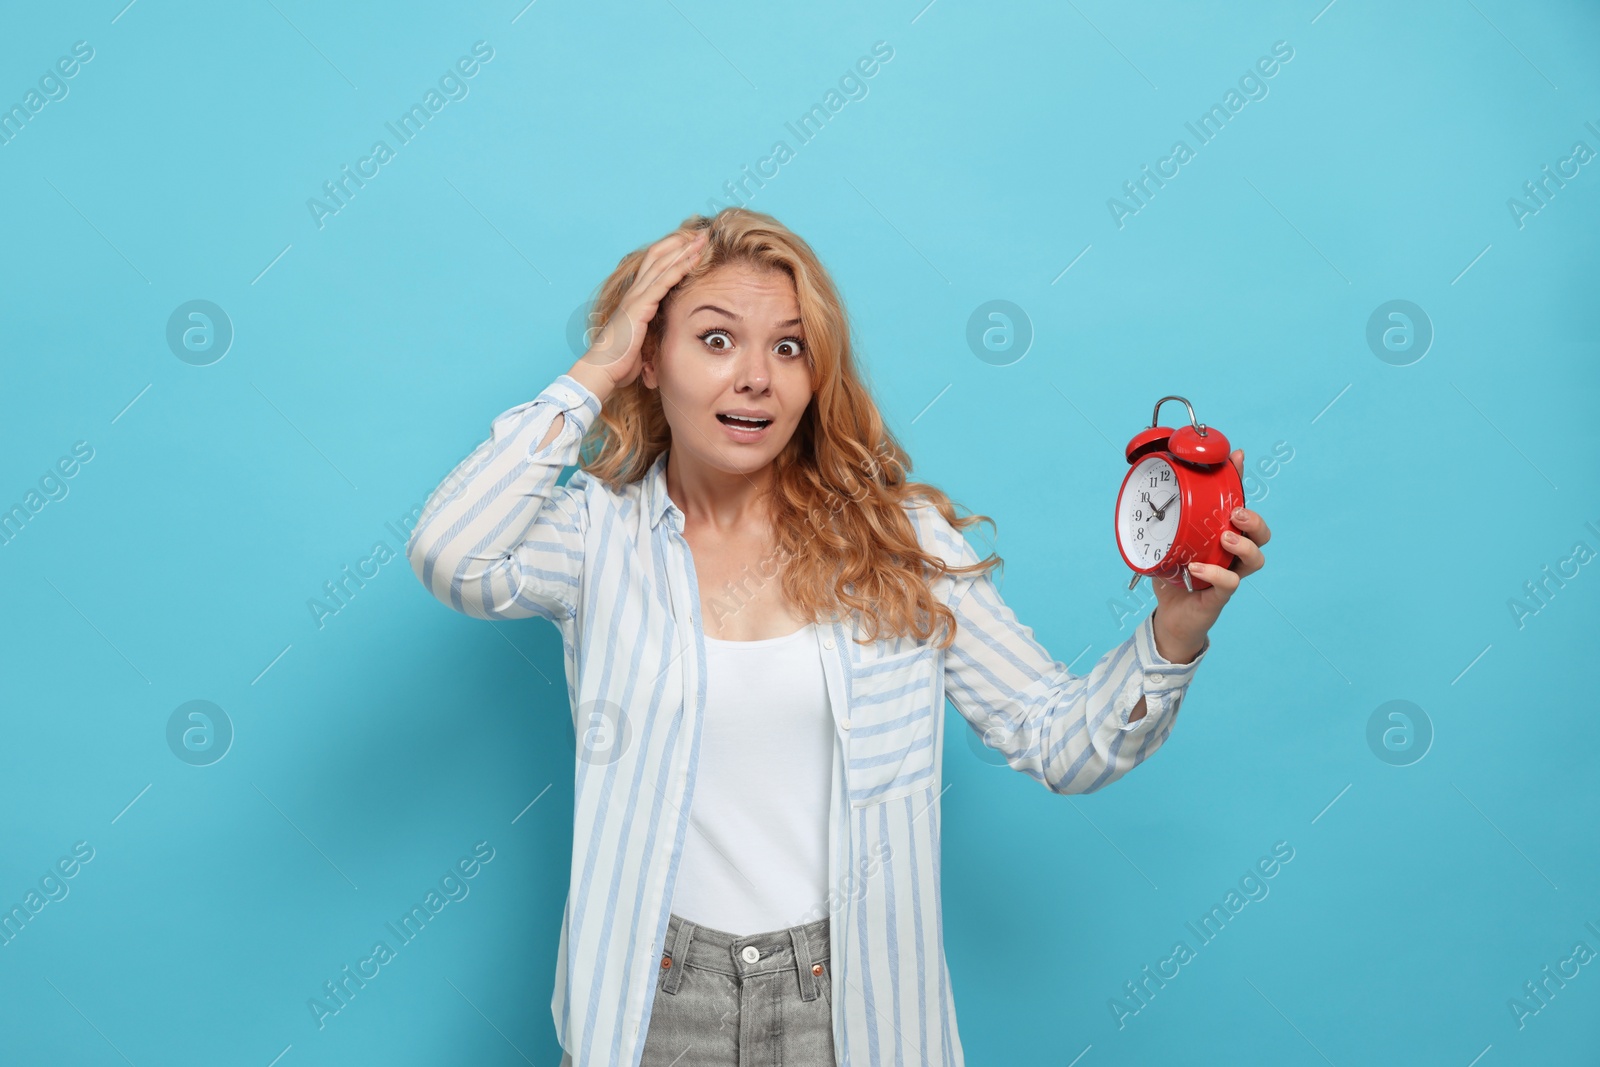 Photo of Emotional woman with alarm clock in turmoil over being late on light blue background